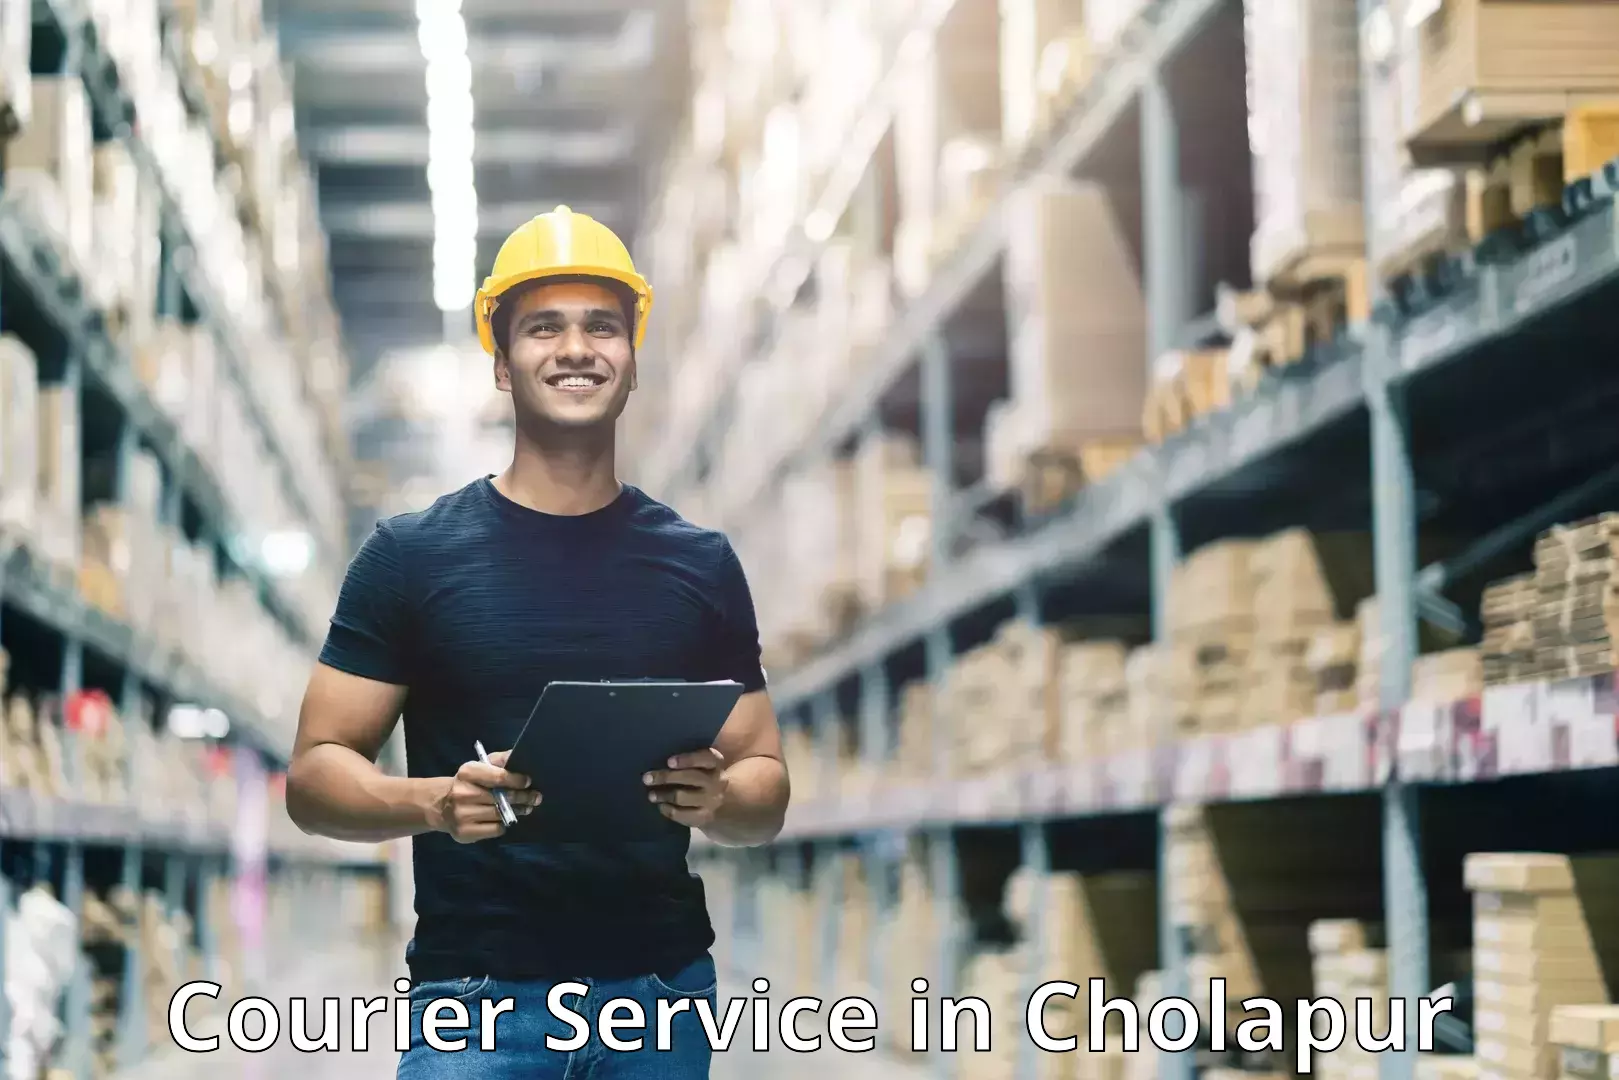 Tech-enabled shipping in Cholapur